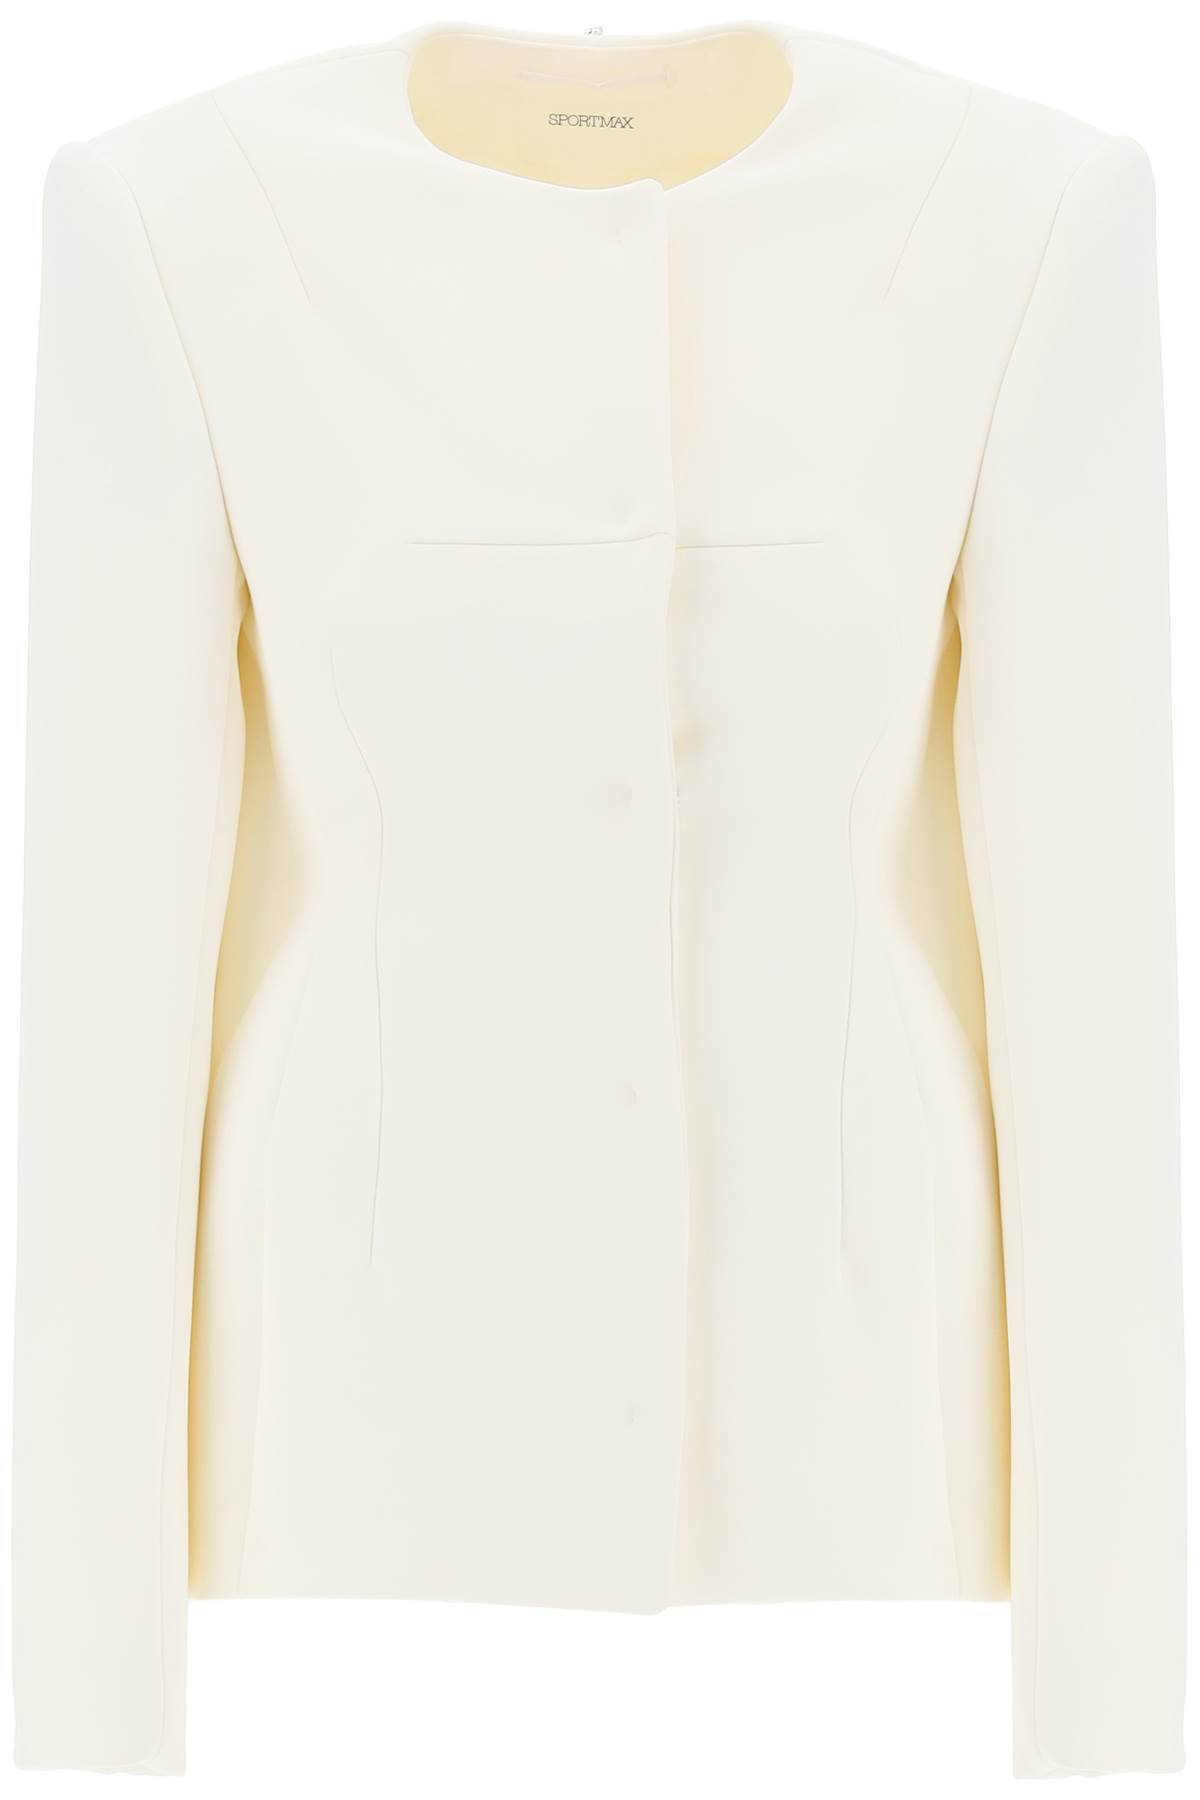 Sportmax SPORTMAX "tailored and cocoon-shaped